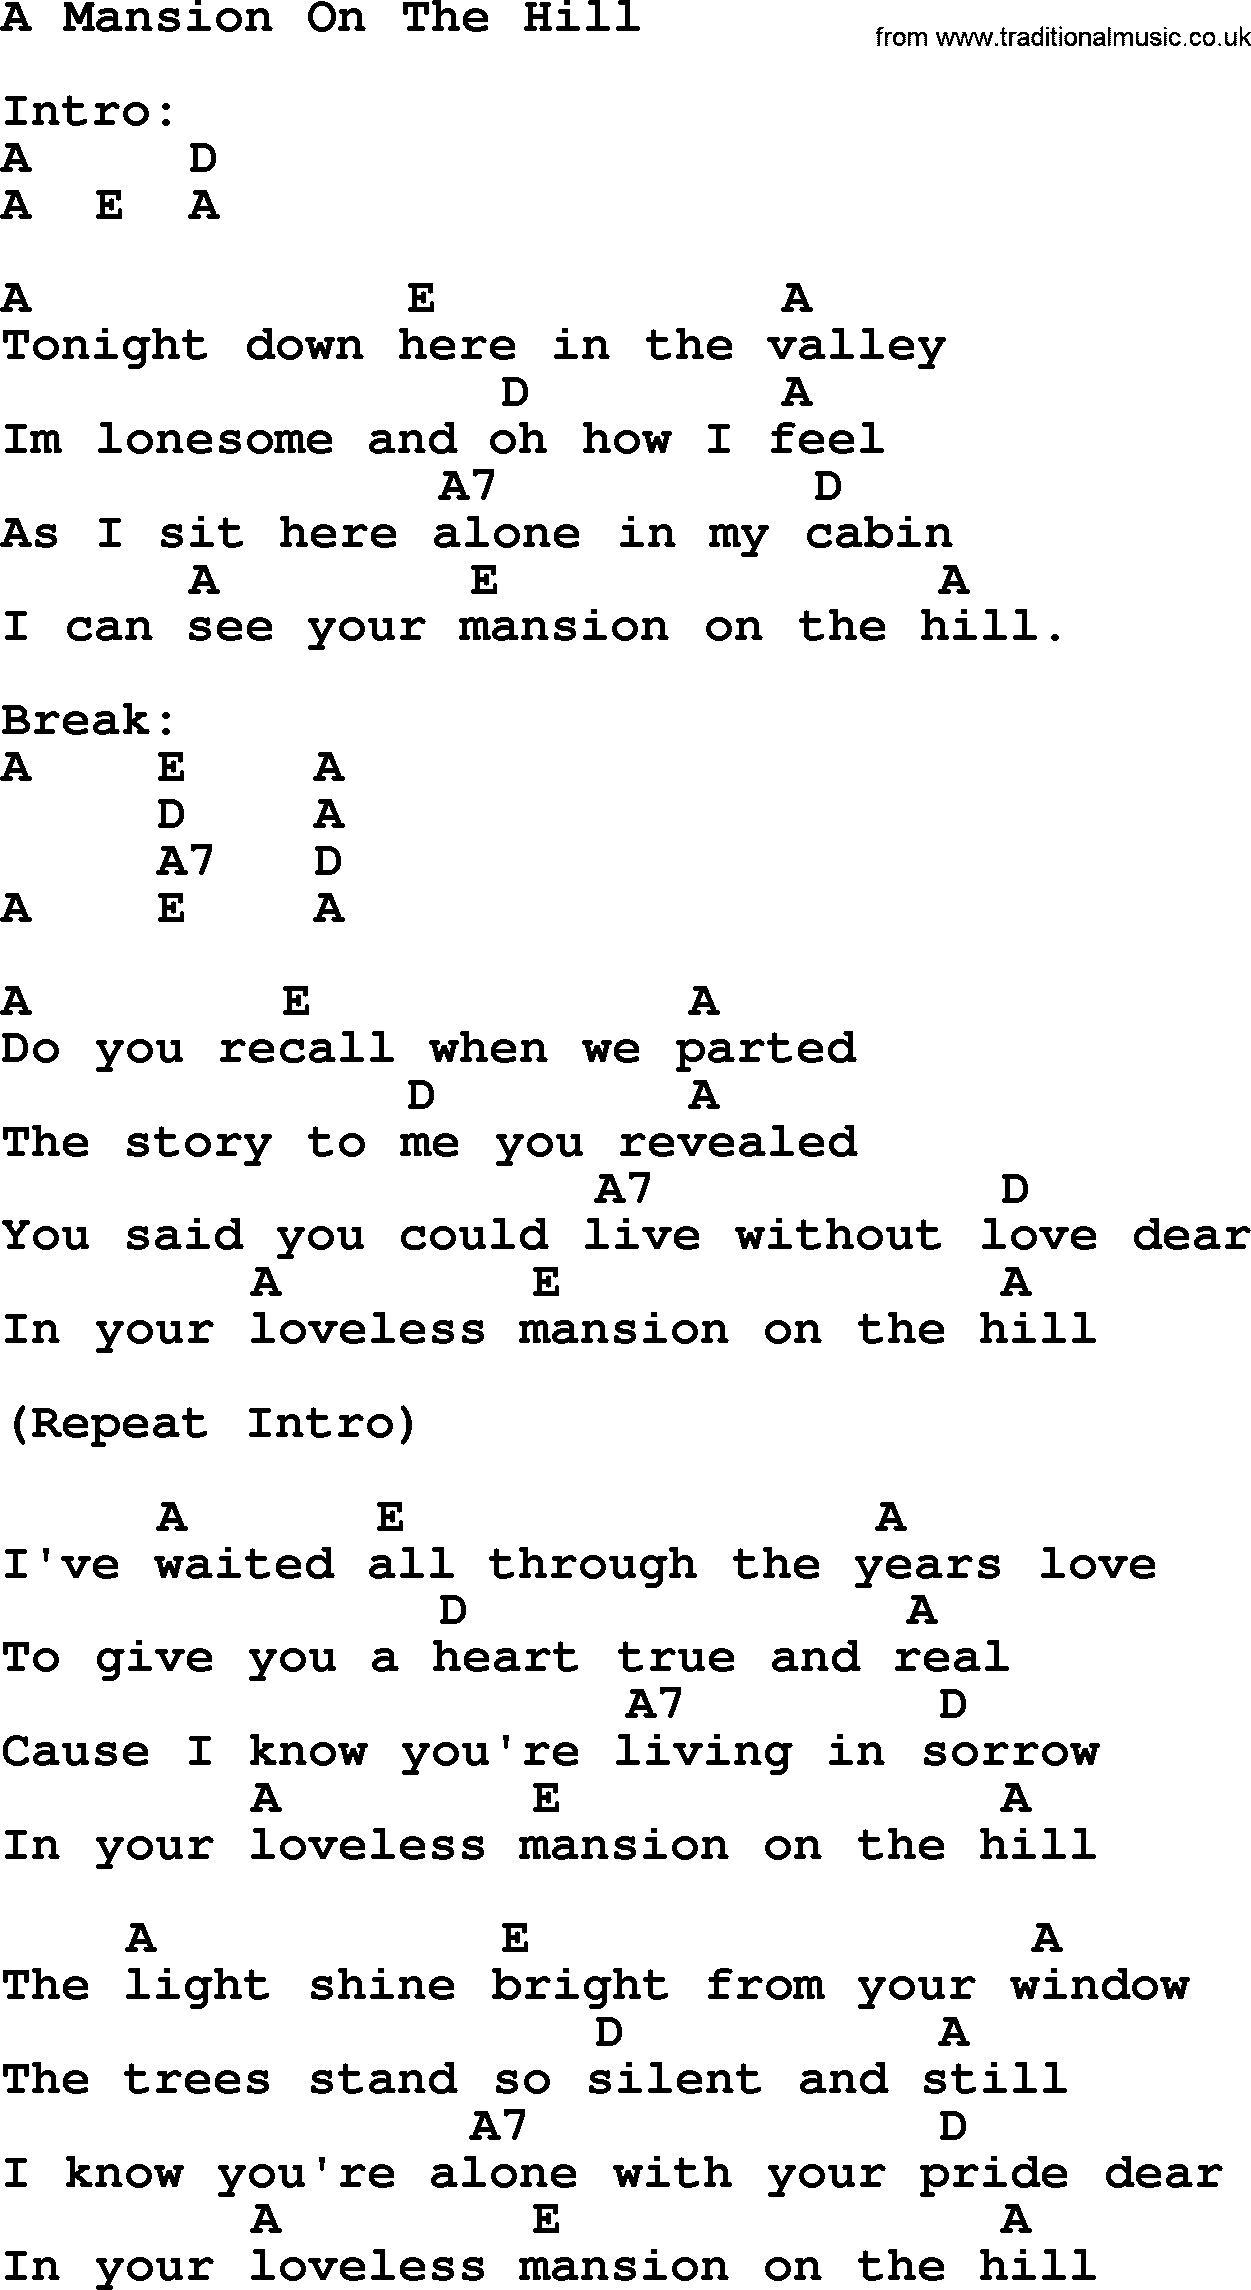 Hank Williams song A Mansion On The Hill, lyrics and chords